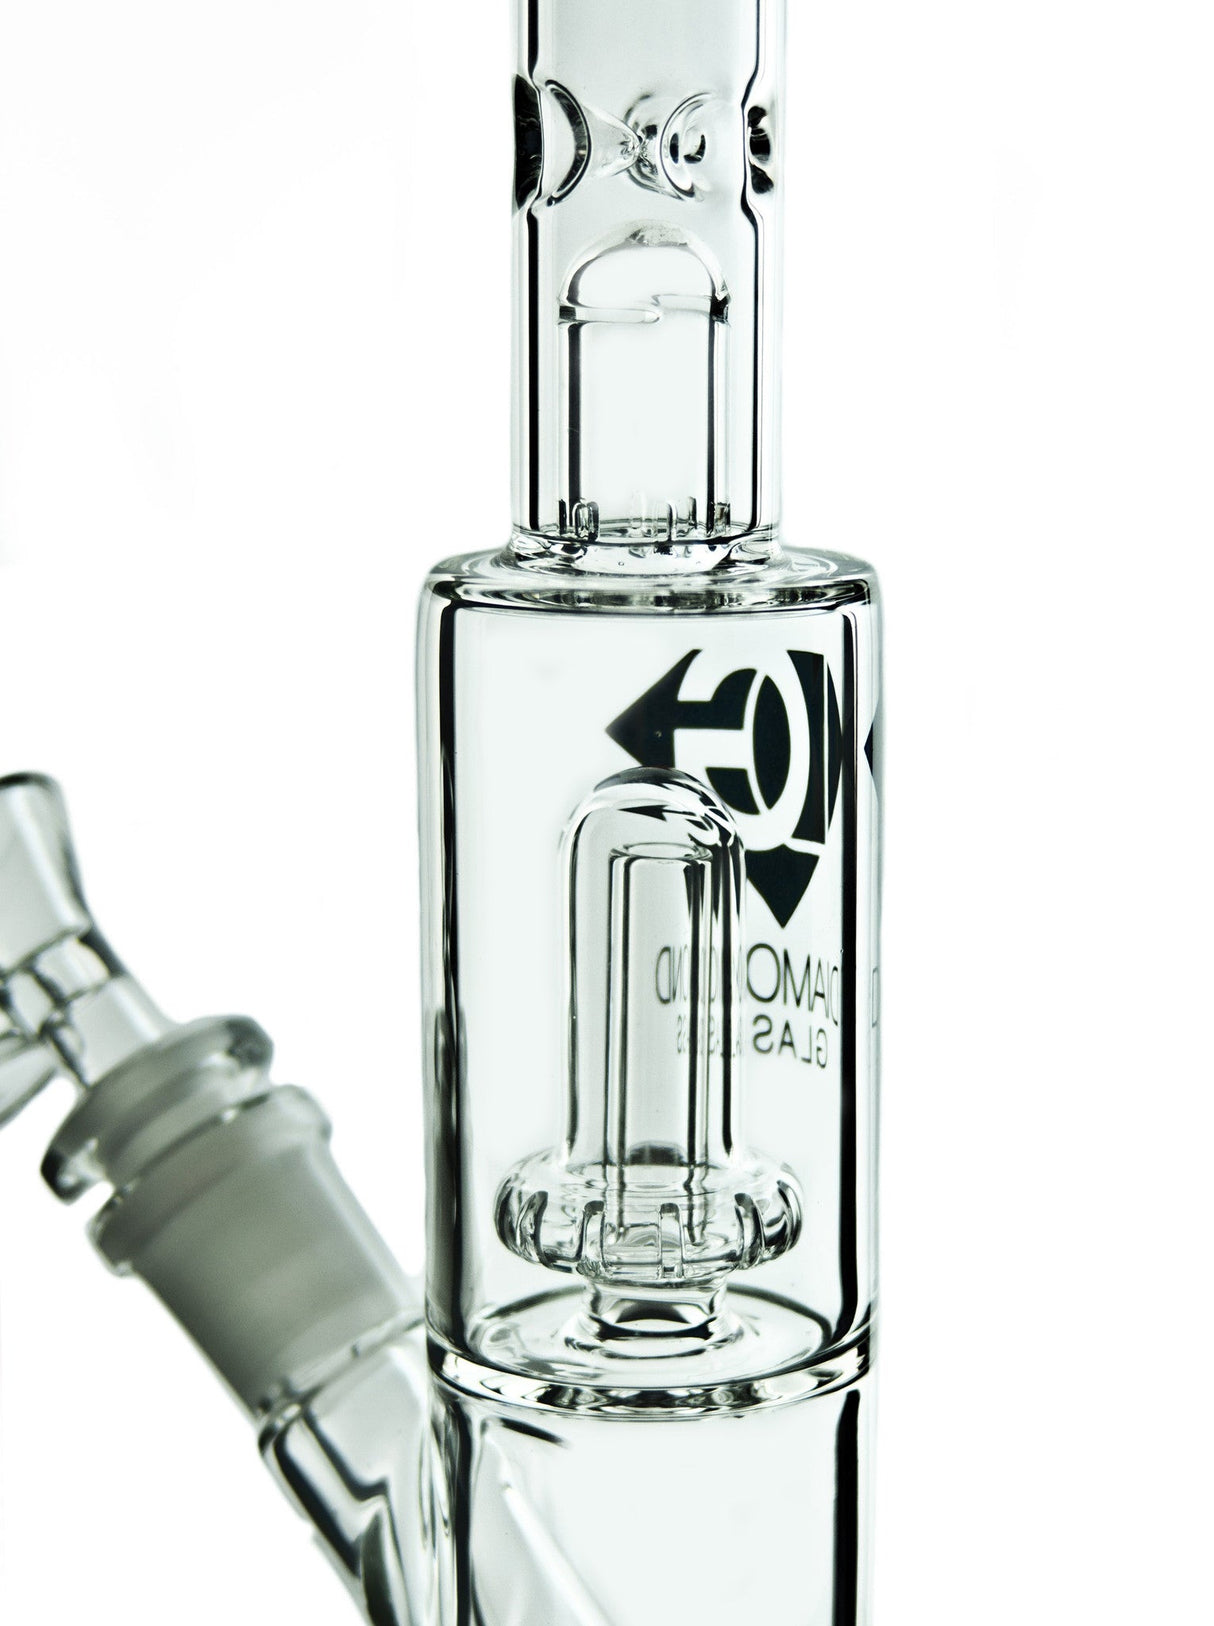 Close-up of Diamond Glass 11'' Beaker Bong with Showerhead Perc, clear glass design, and logo detail.